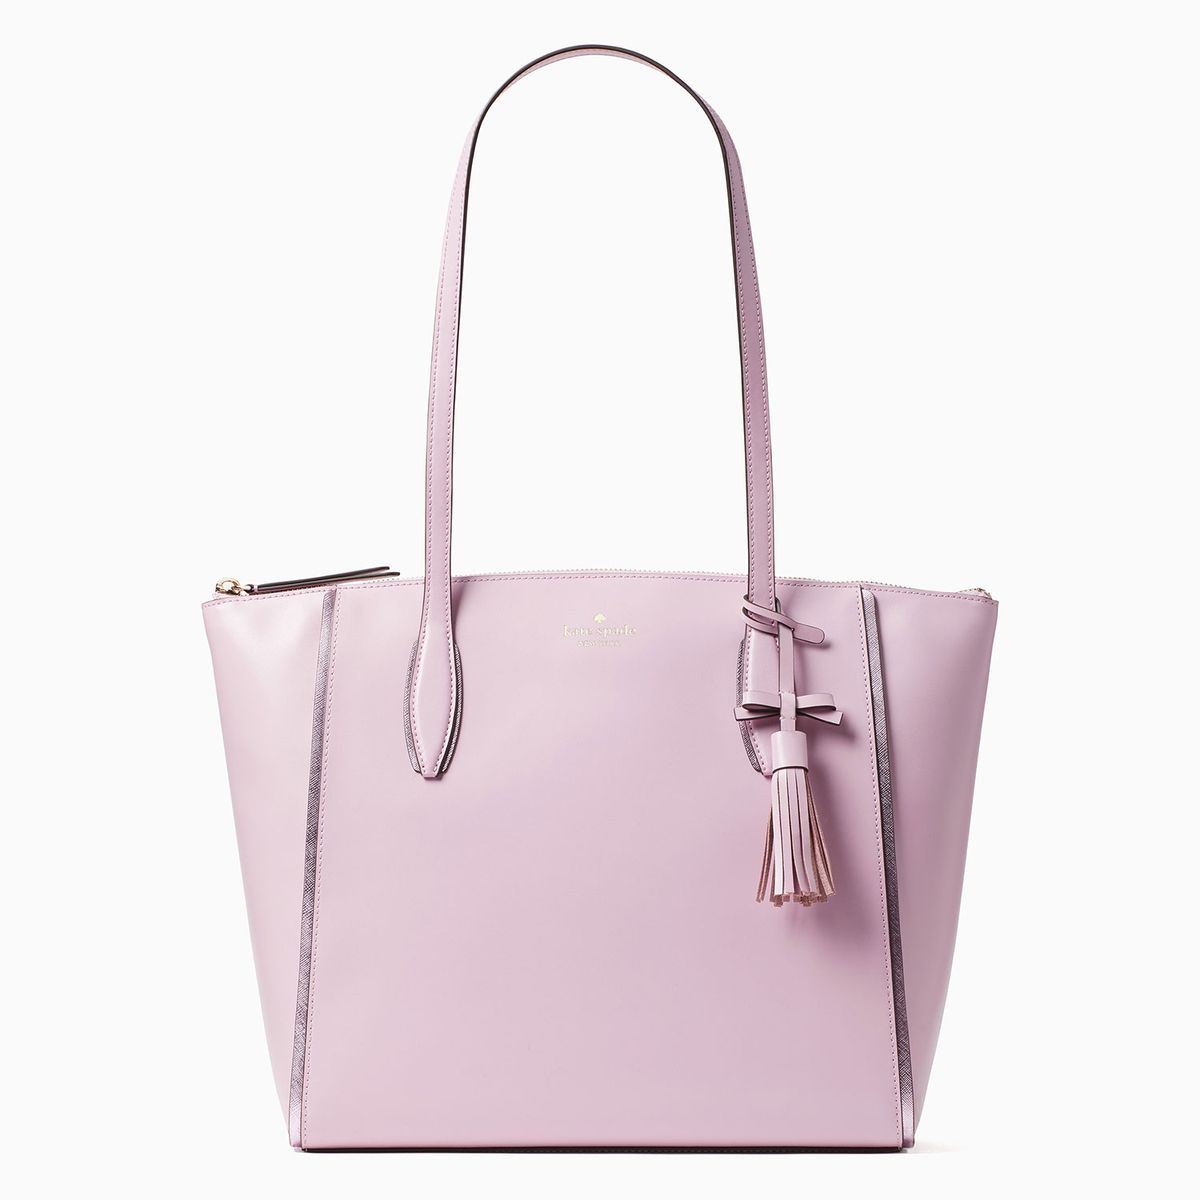 8 Kate Spade Surprise Sale Styles to Shop Right Now | Southern Living